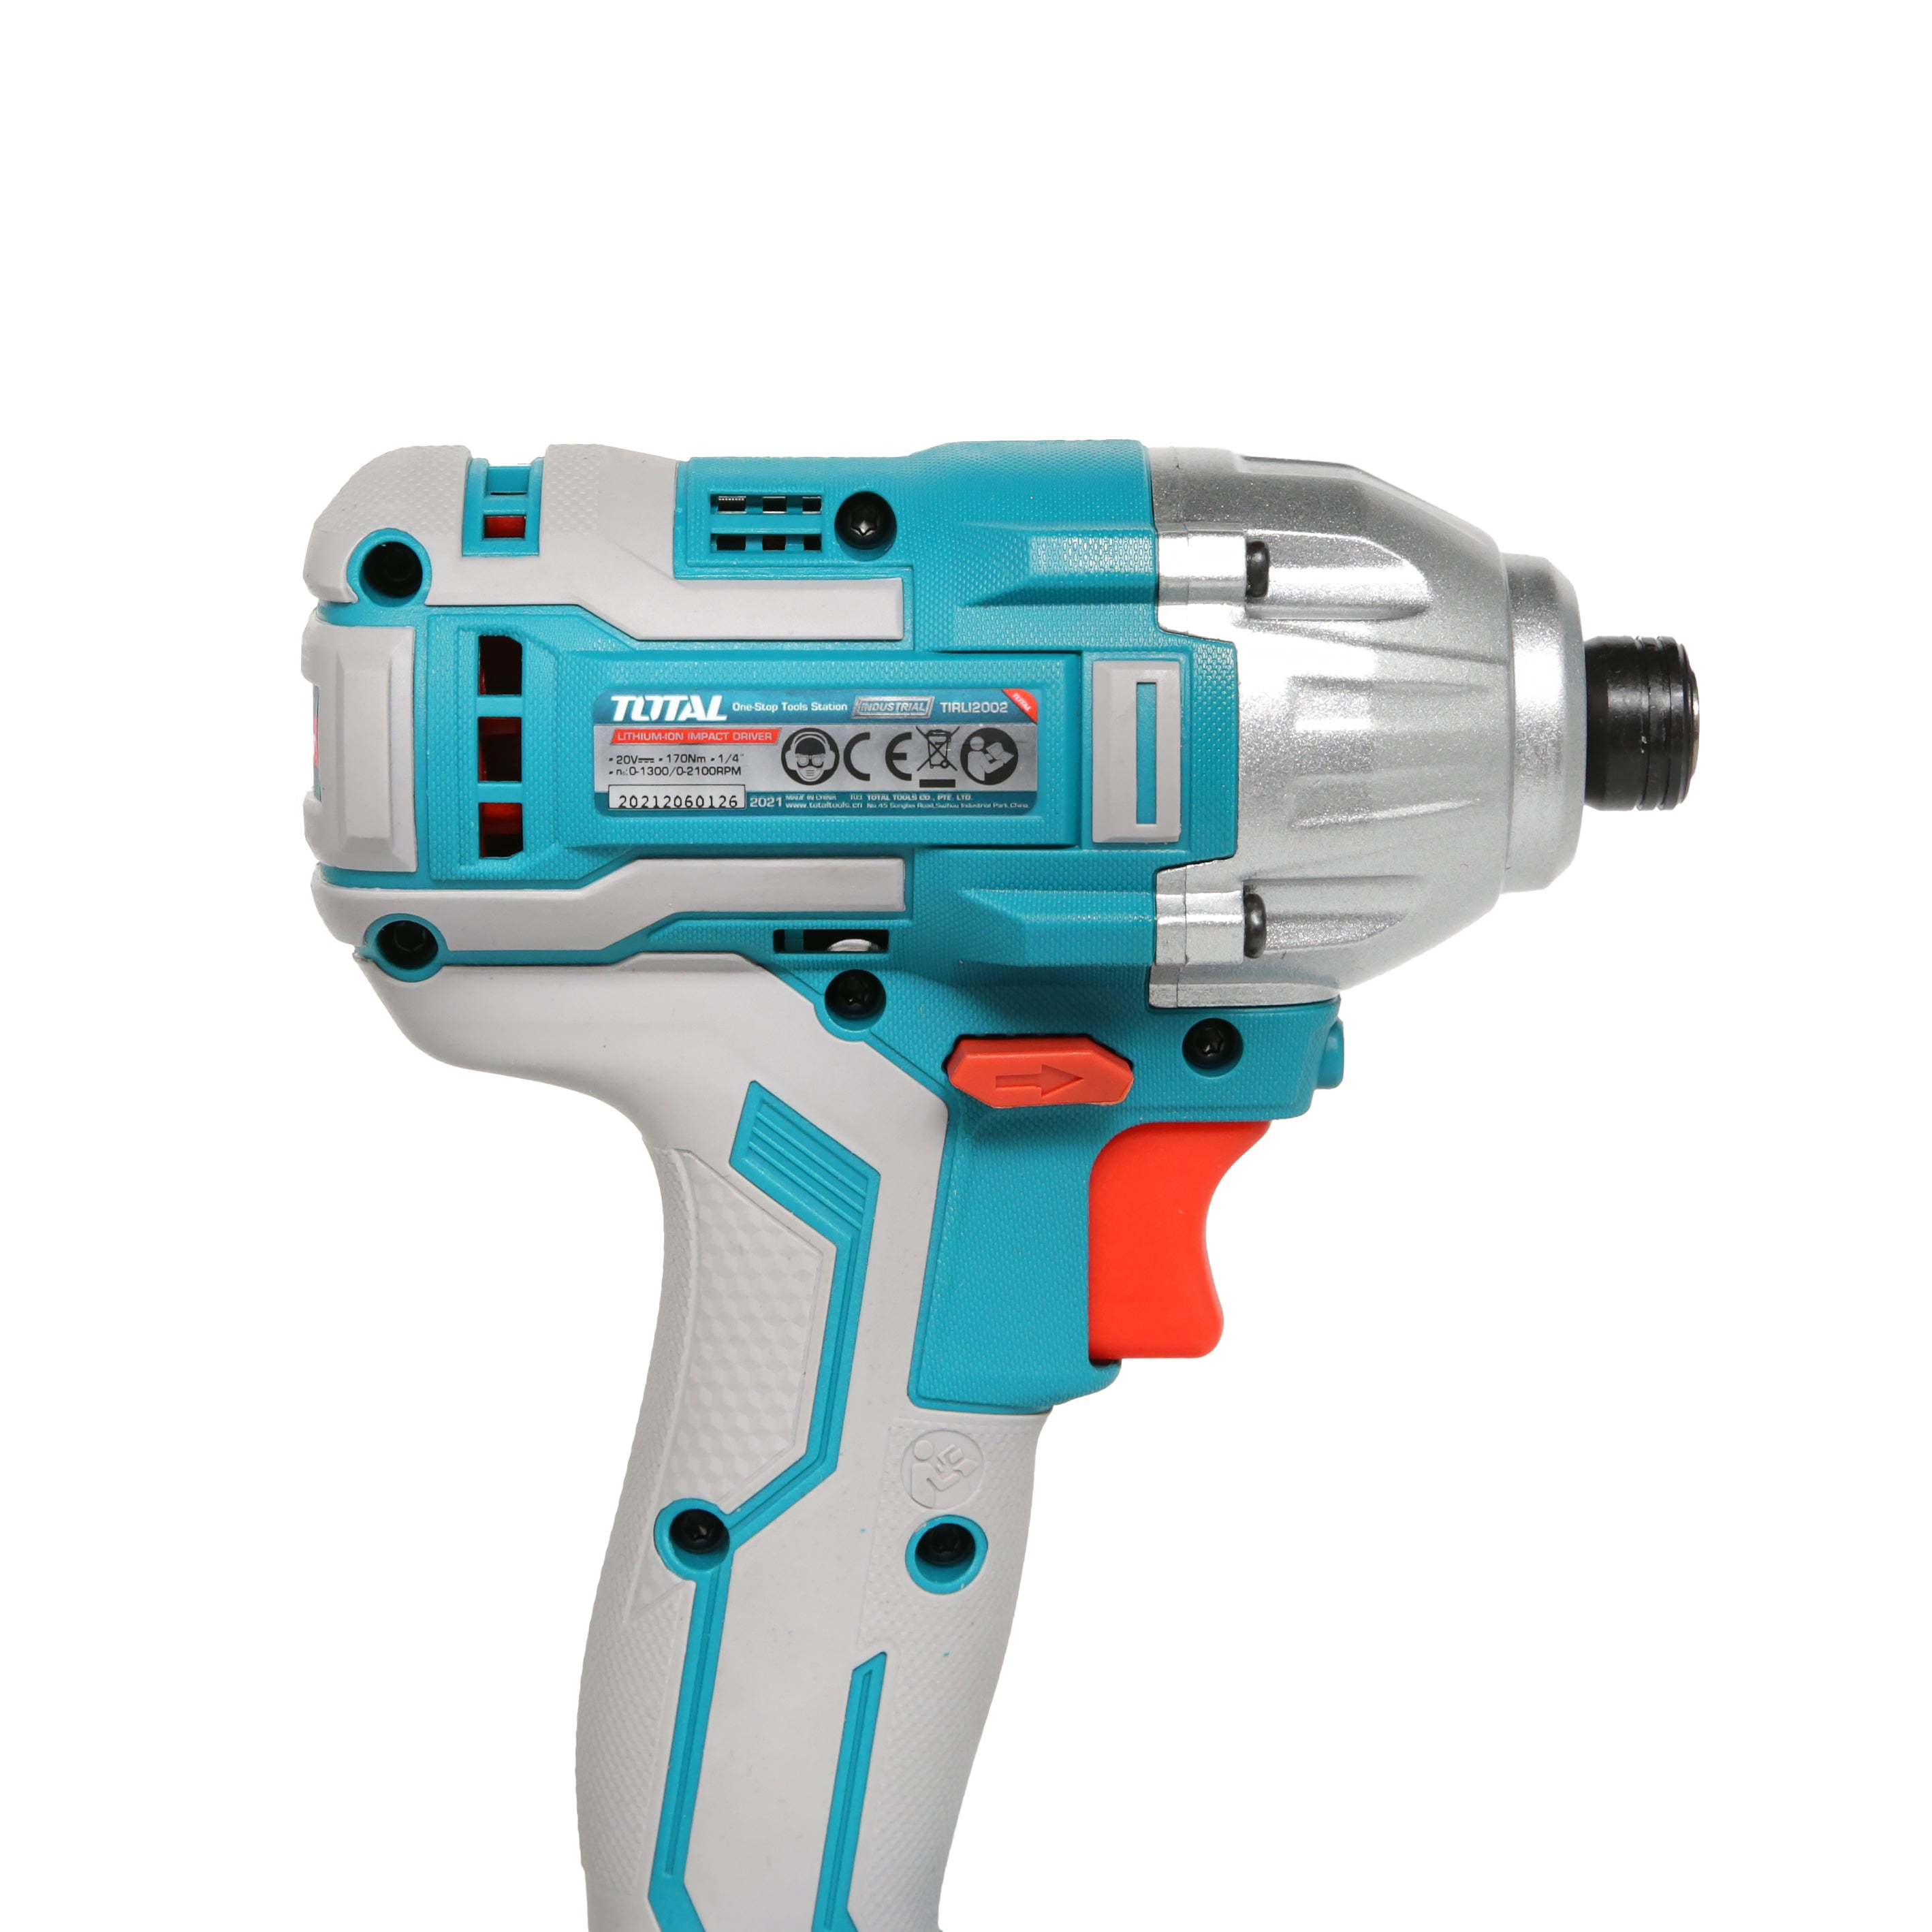 Total Li-Ion 20V Impact Driver (with 2 x Batteries & Charger) - TIRLI2002